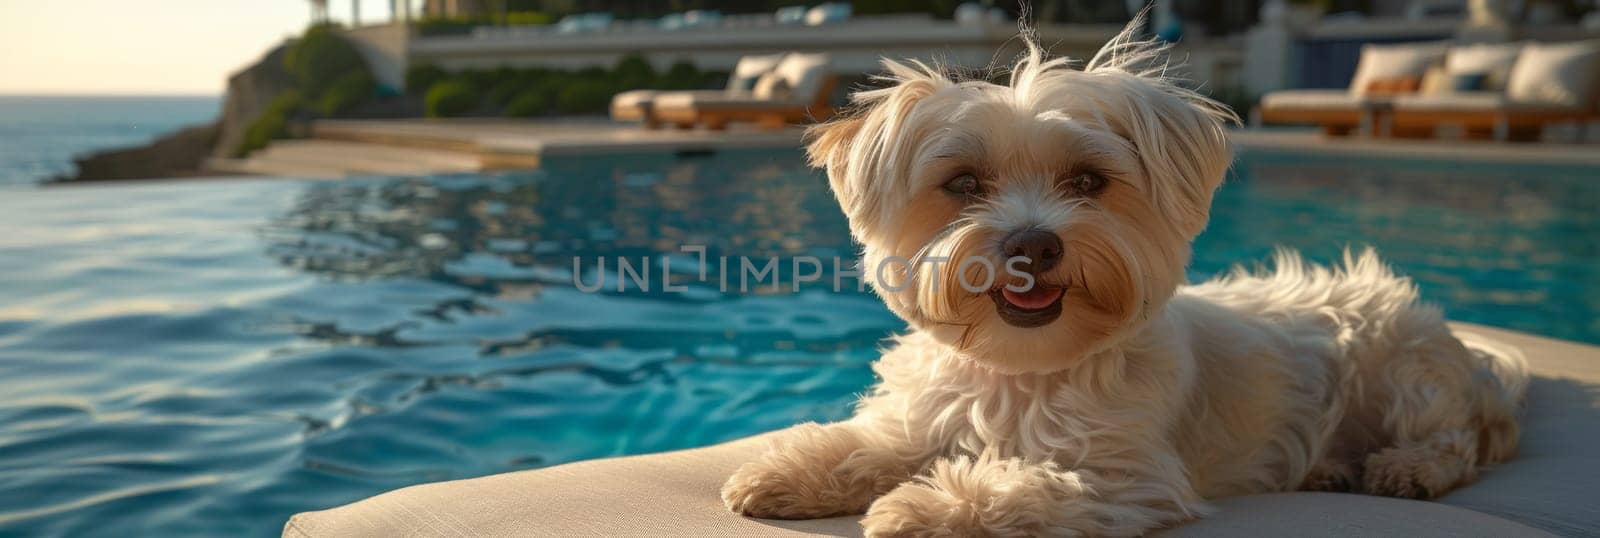 A small white dog sitting on a cushion next to the pool, AI by starush